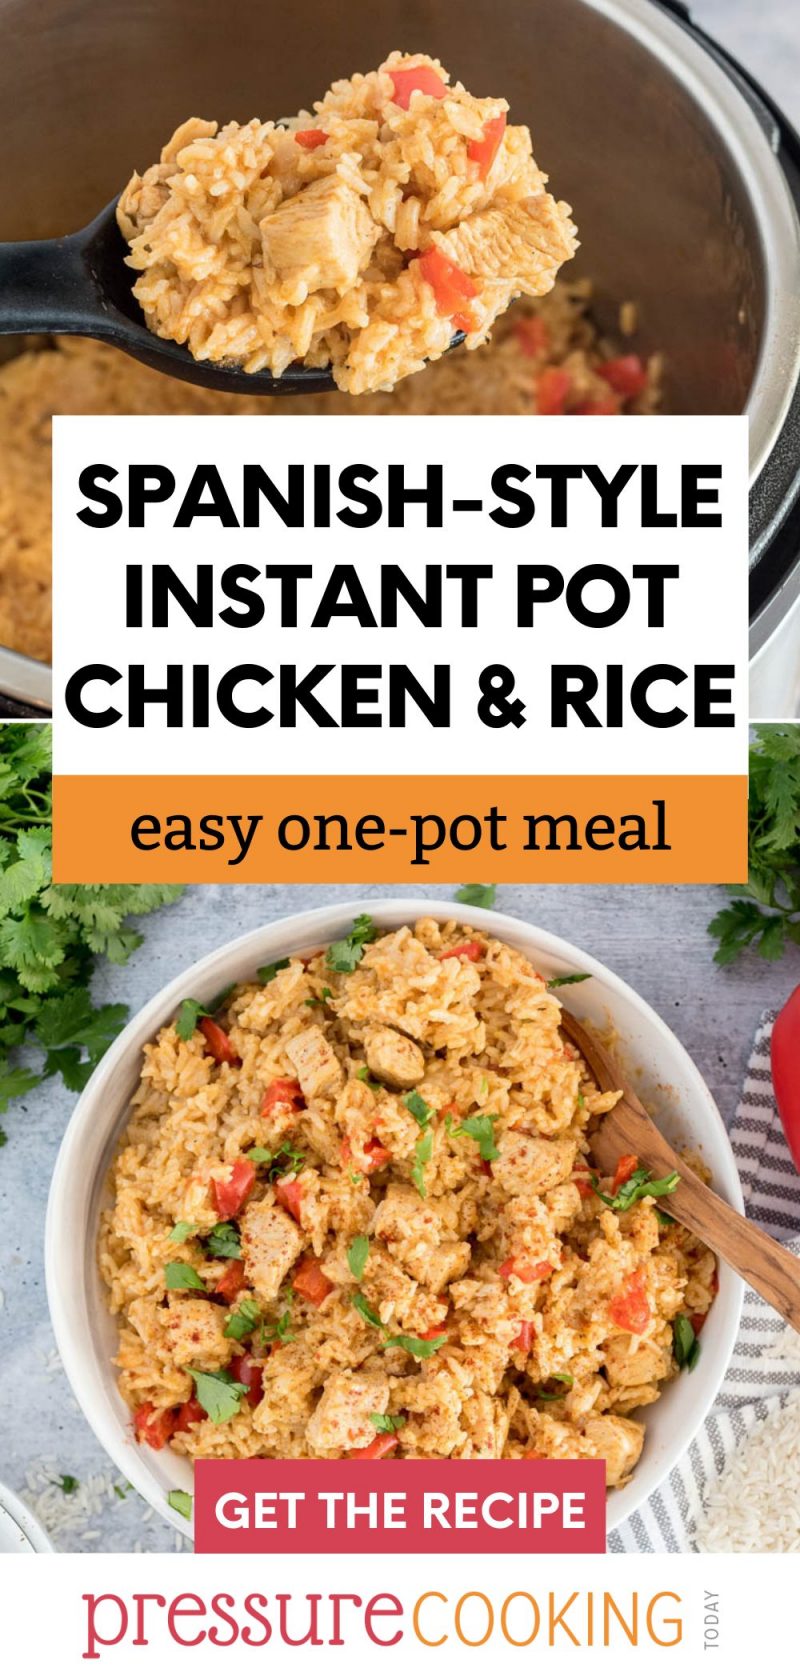 Pinterest button for Instant Pot Chicken and Rice (Spanish-style flavors), featuring two photos: the top shows a spoonful of chicken and rice coming out of the instant pot, and the bottom photo shows an overhead view of a white bowl full of Instant Pot chicken and rice